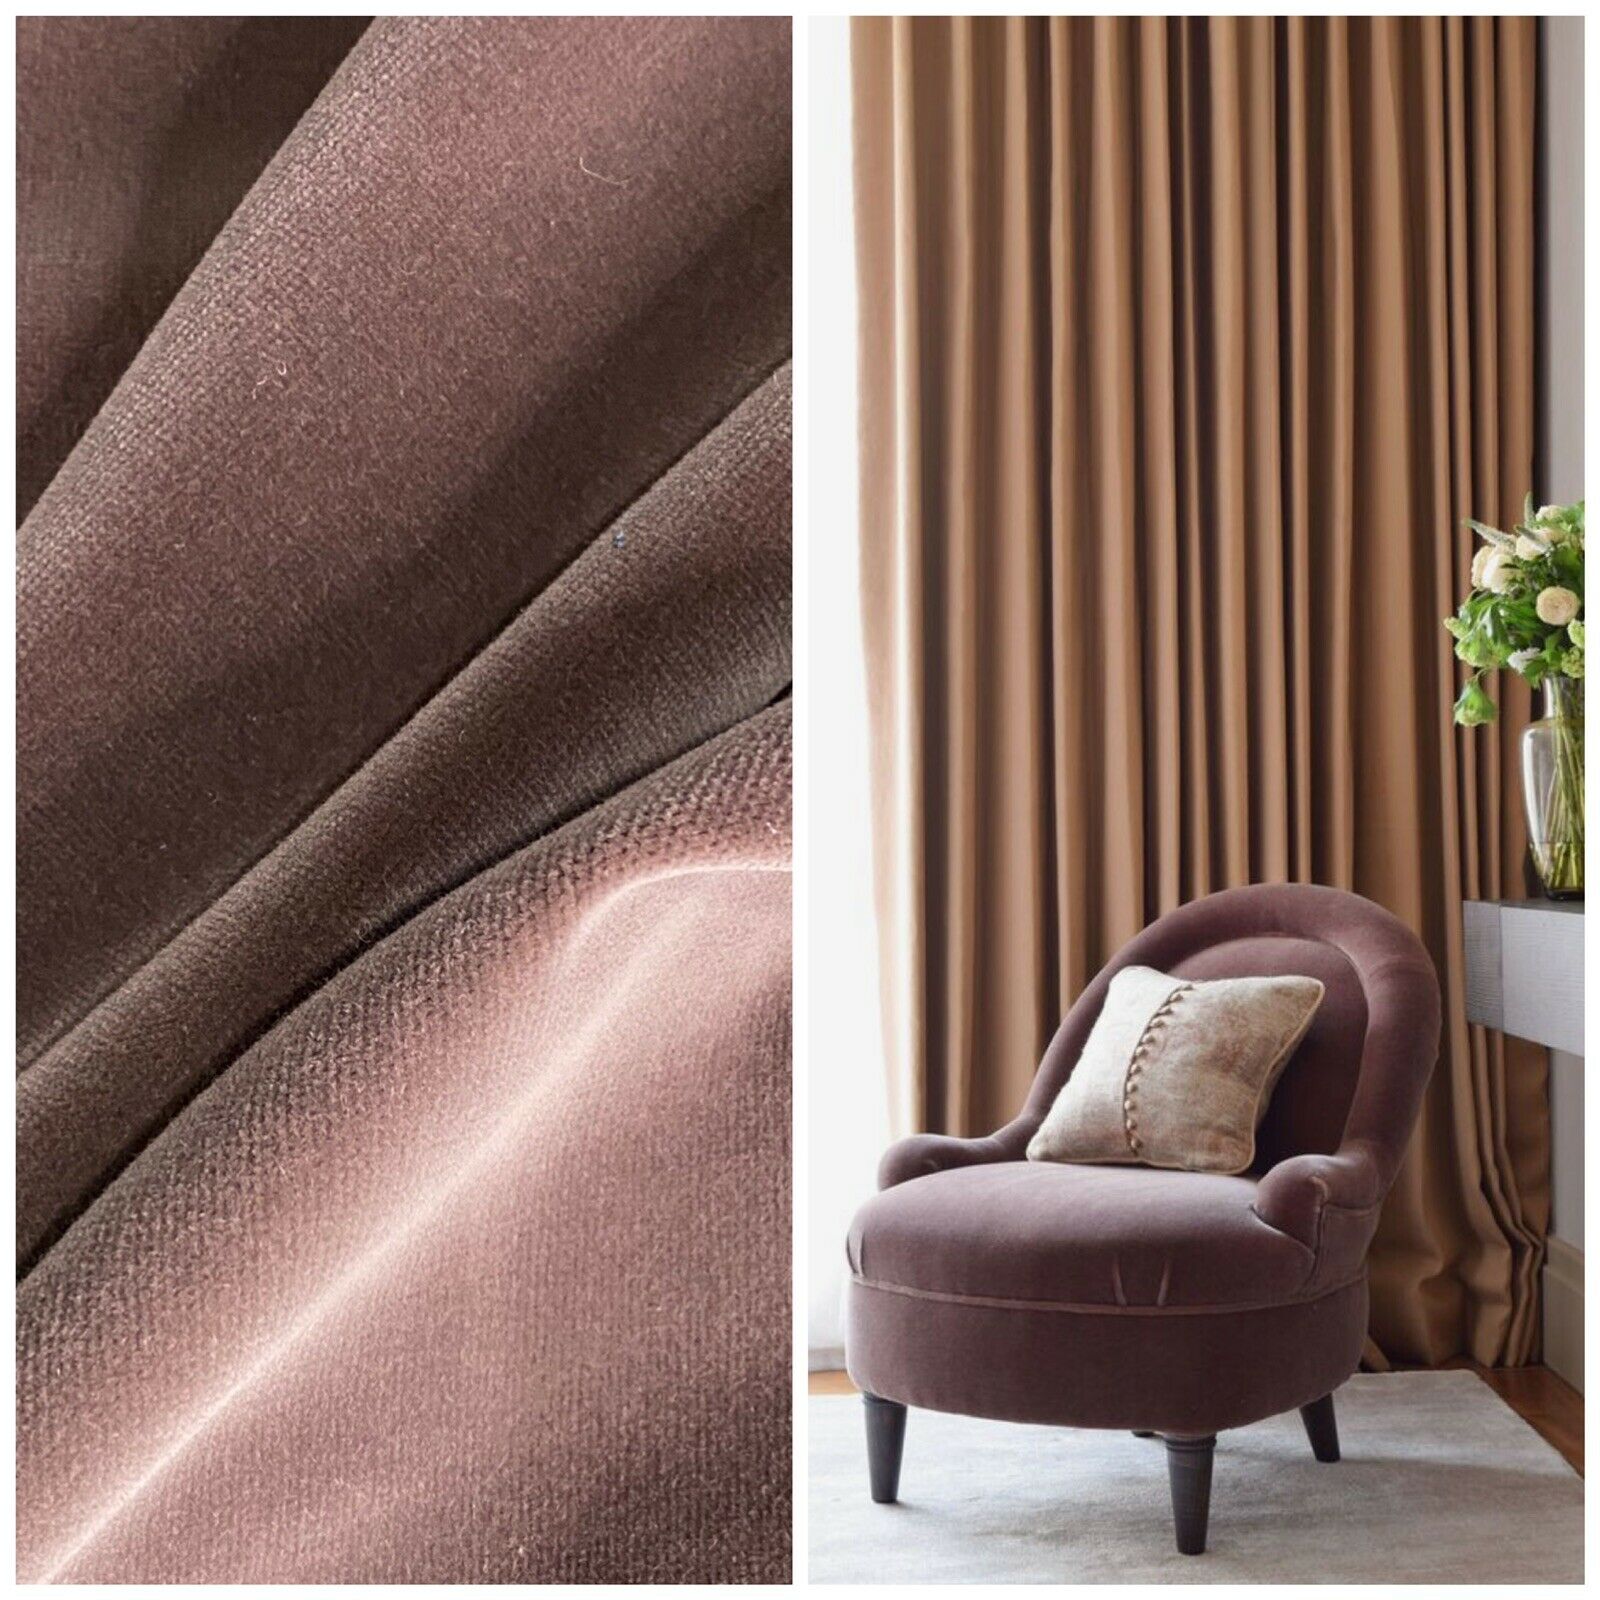 erfaring excitation Hængsel NEW Designer Velvet Cotton Upholstery Fabric - Soft- By The Yard- Cocoa  Mauve | www.fancystylesfabric.com